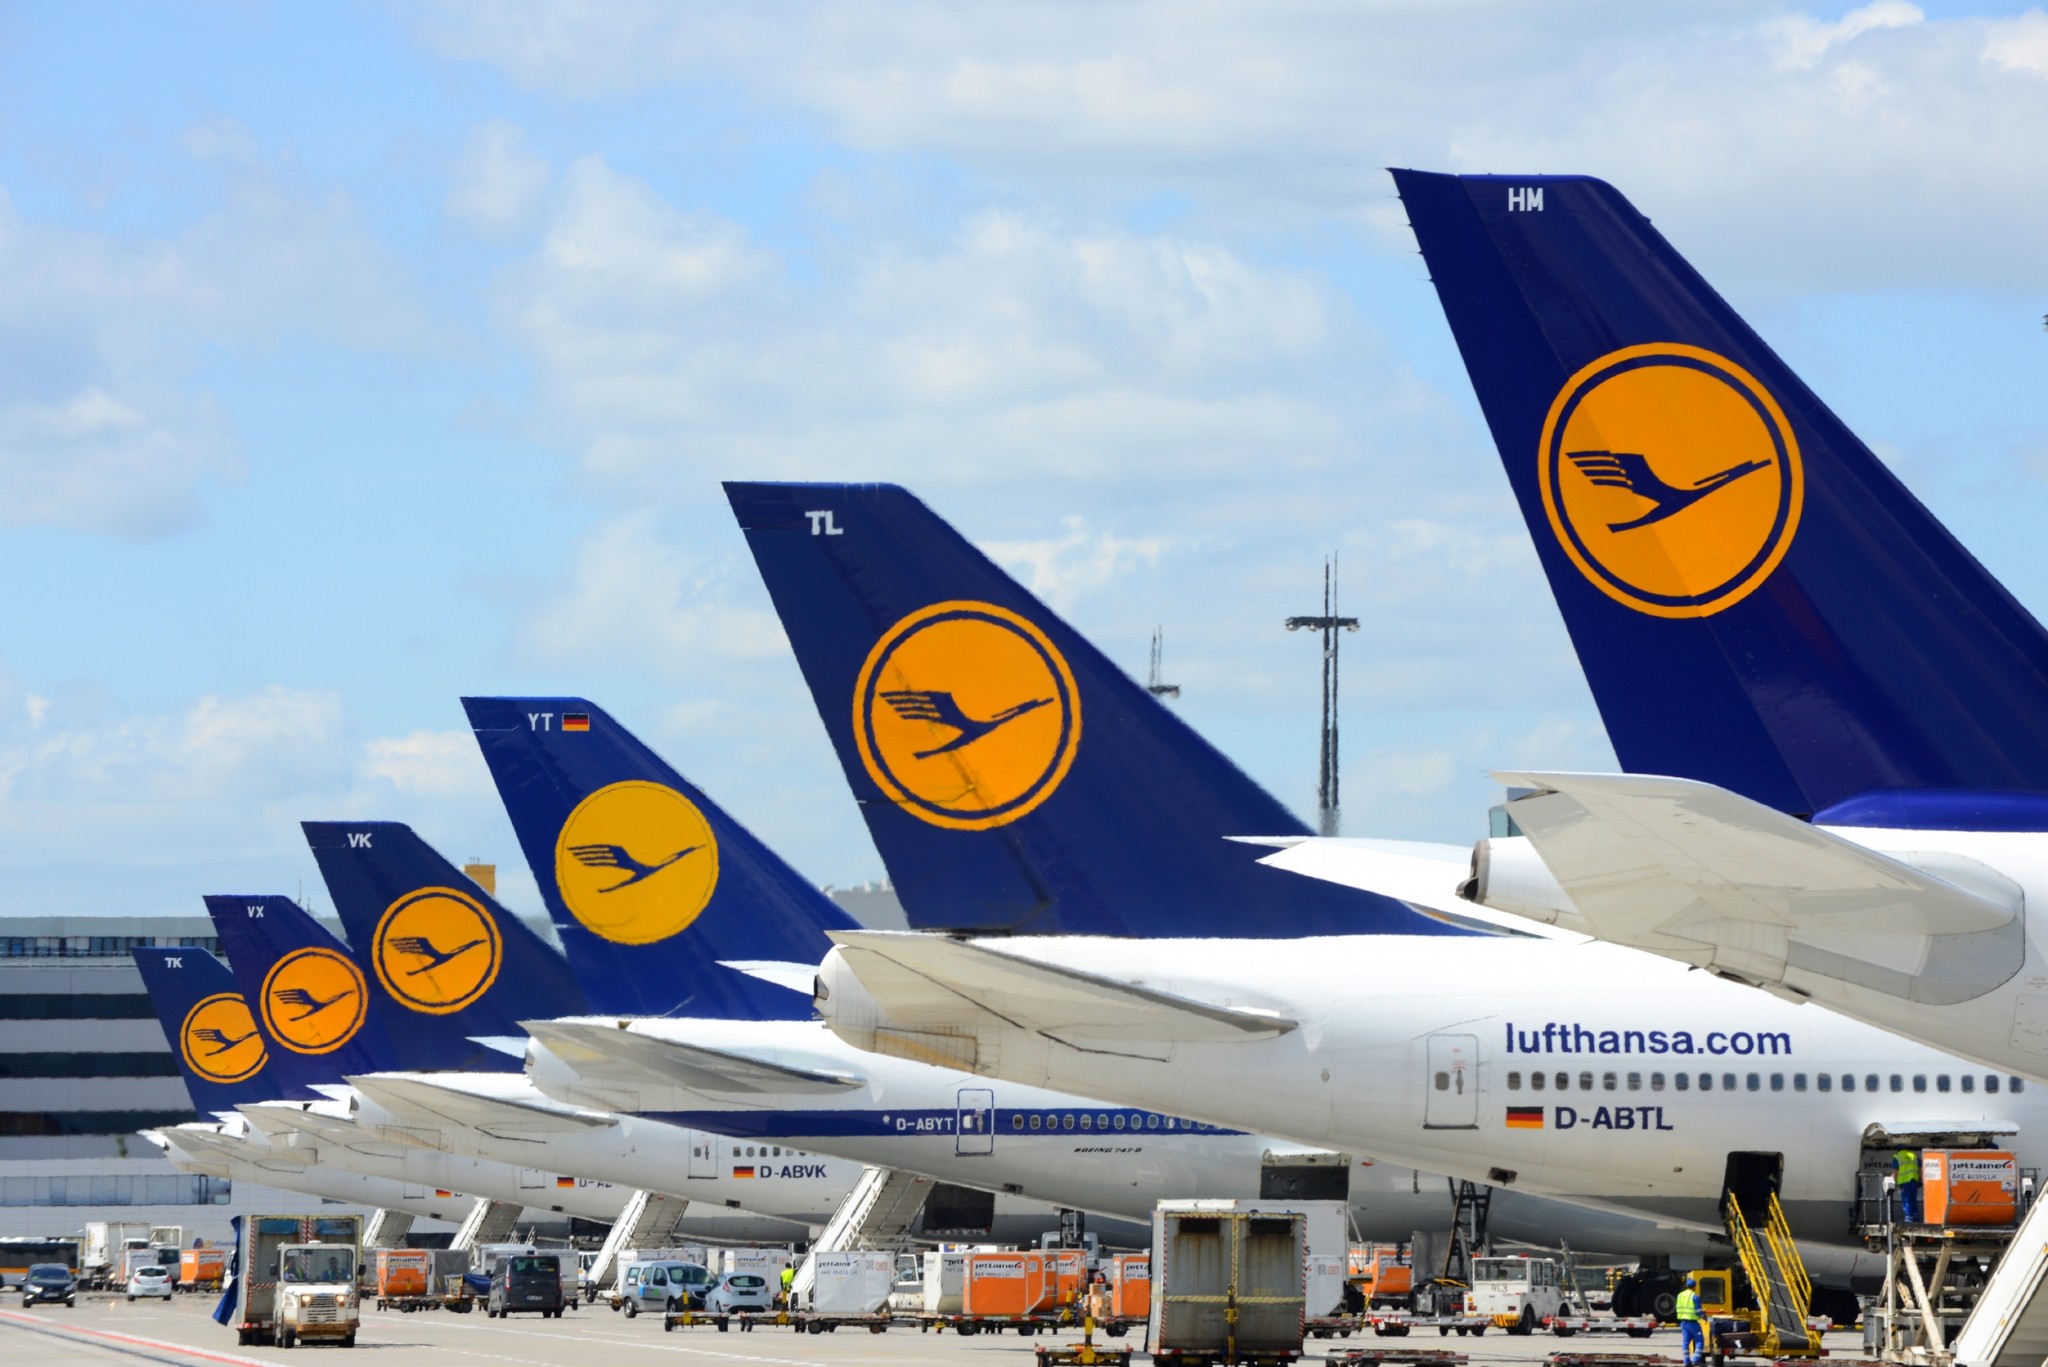 Lufthansa and ver.di agree on crisis package ​​​​​​​through the end of 2021